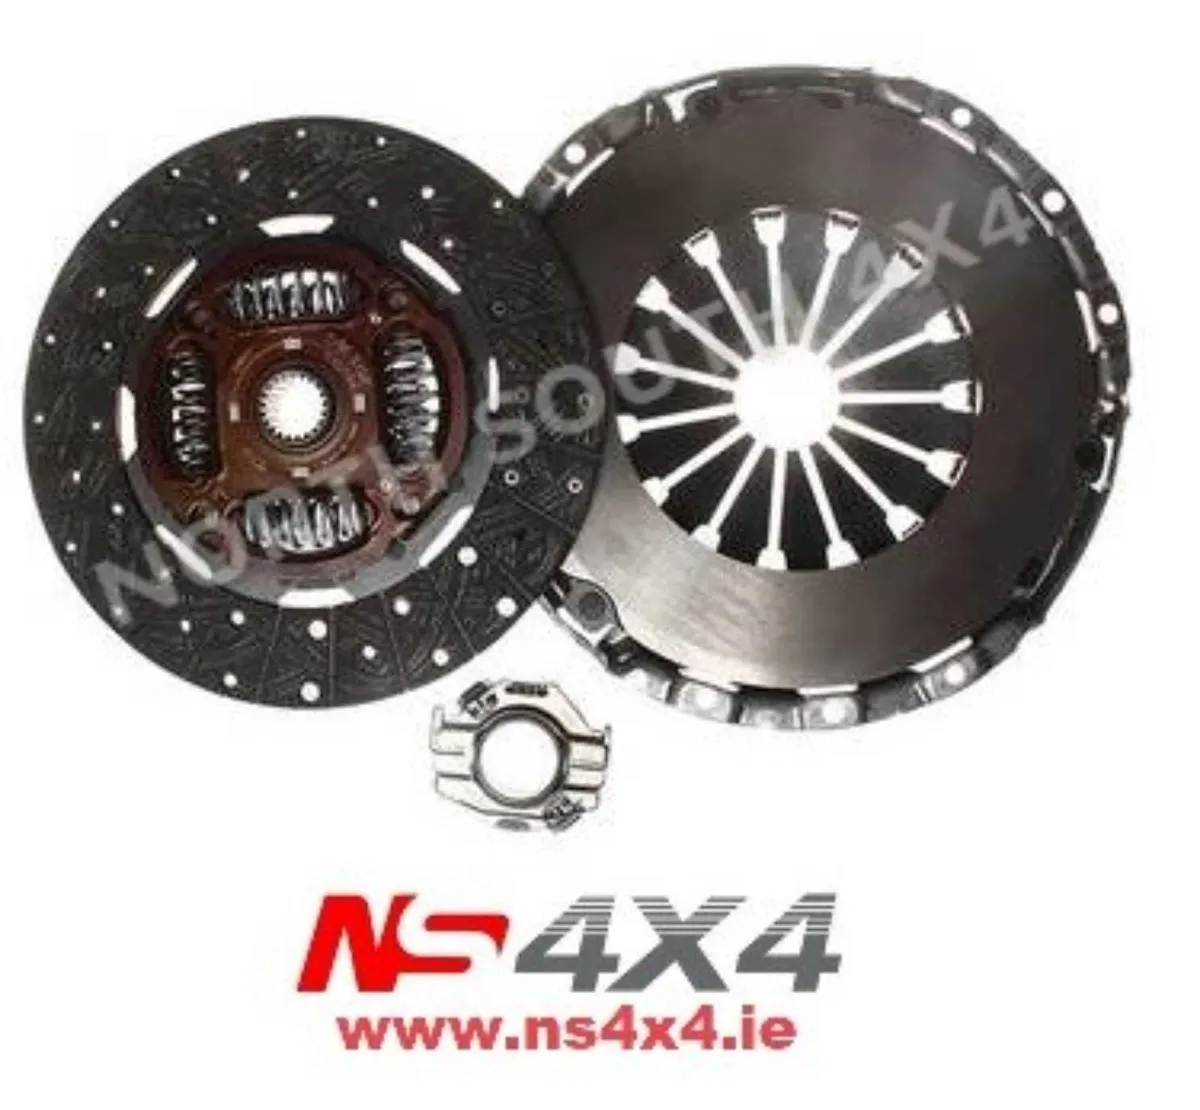 Toyota 4x4 Hilux Clutch Kit // all spares - Image 1